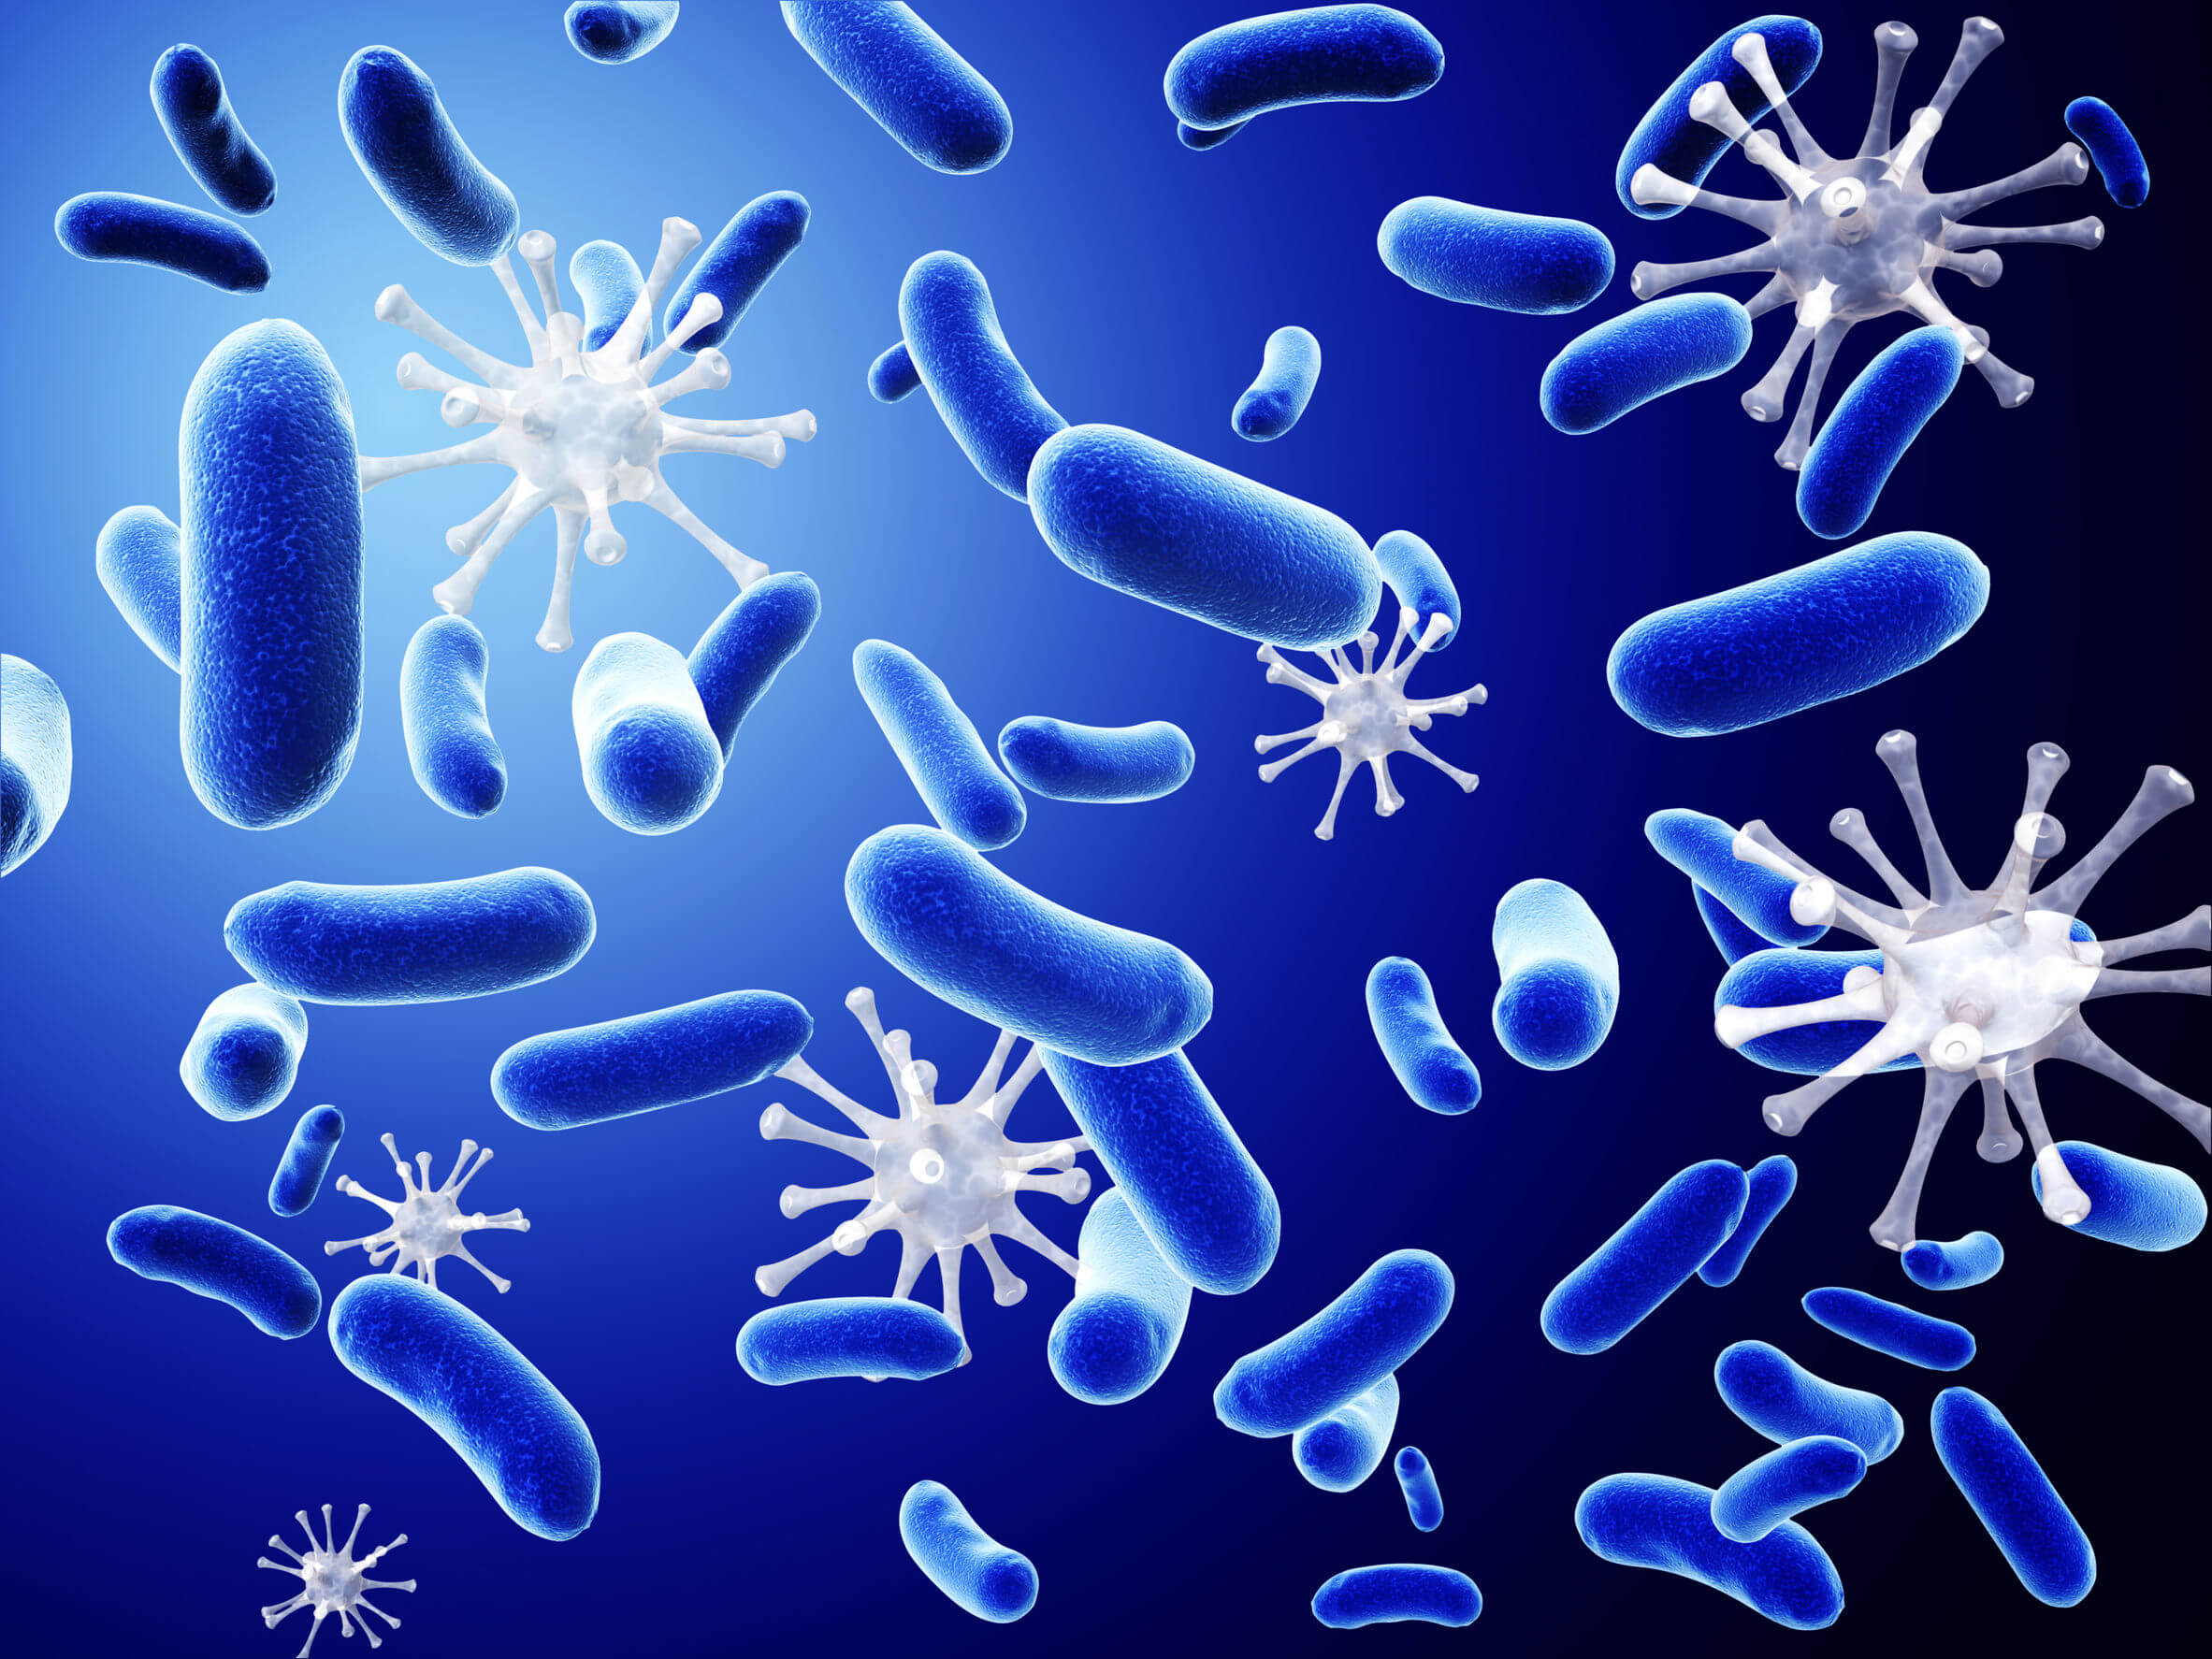 Natural Killer cells are responsible for protecting the body against multiple infections.